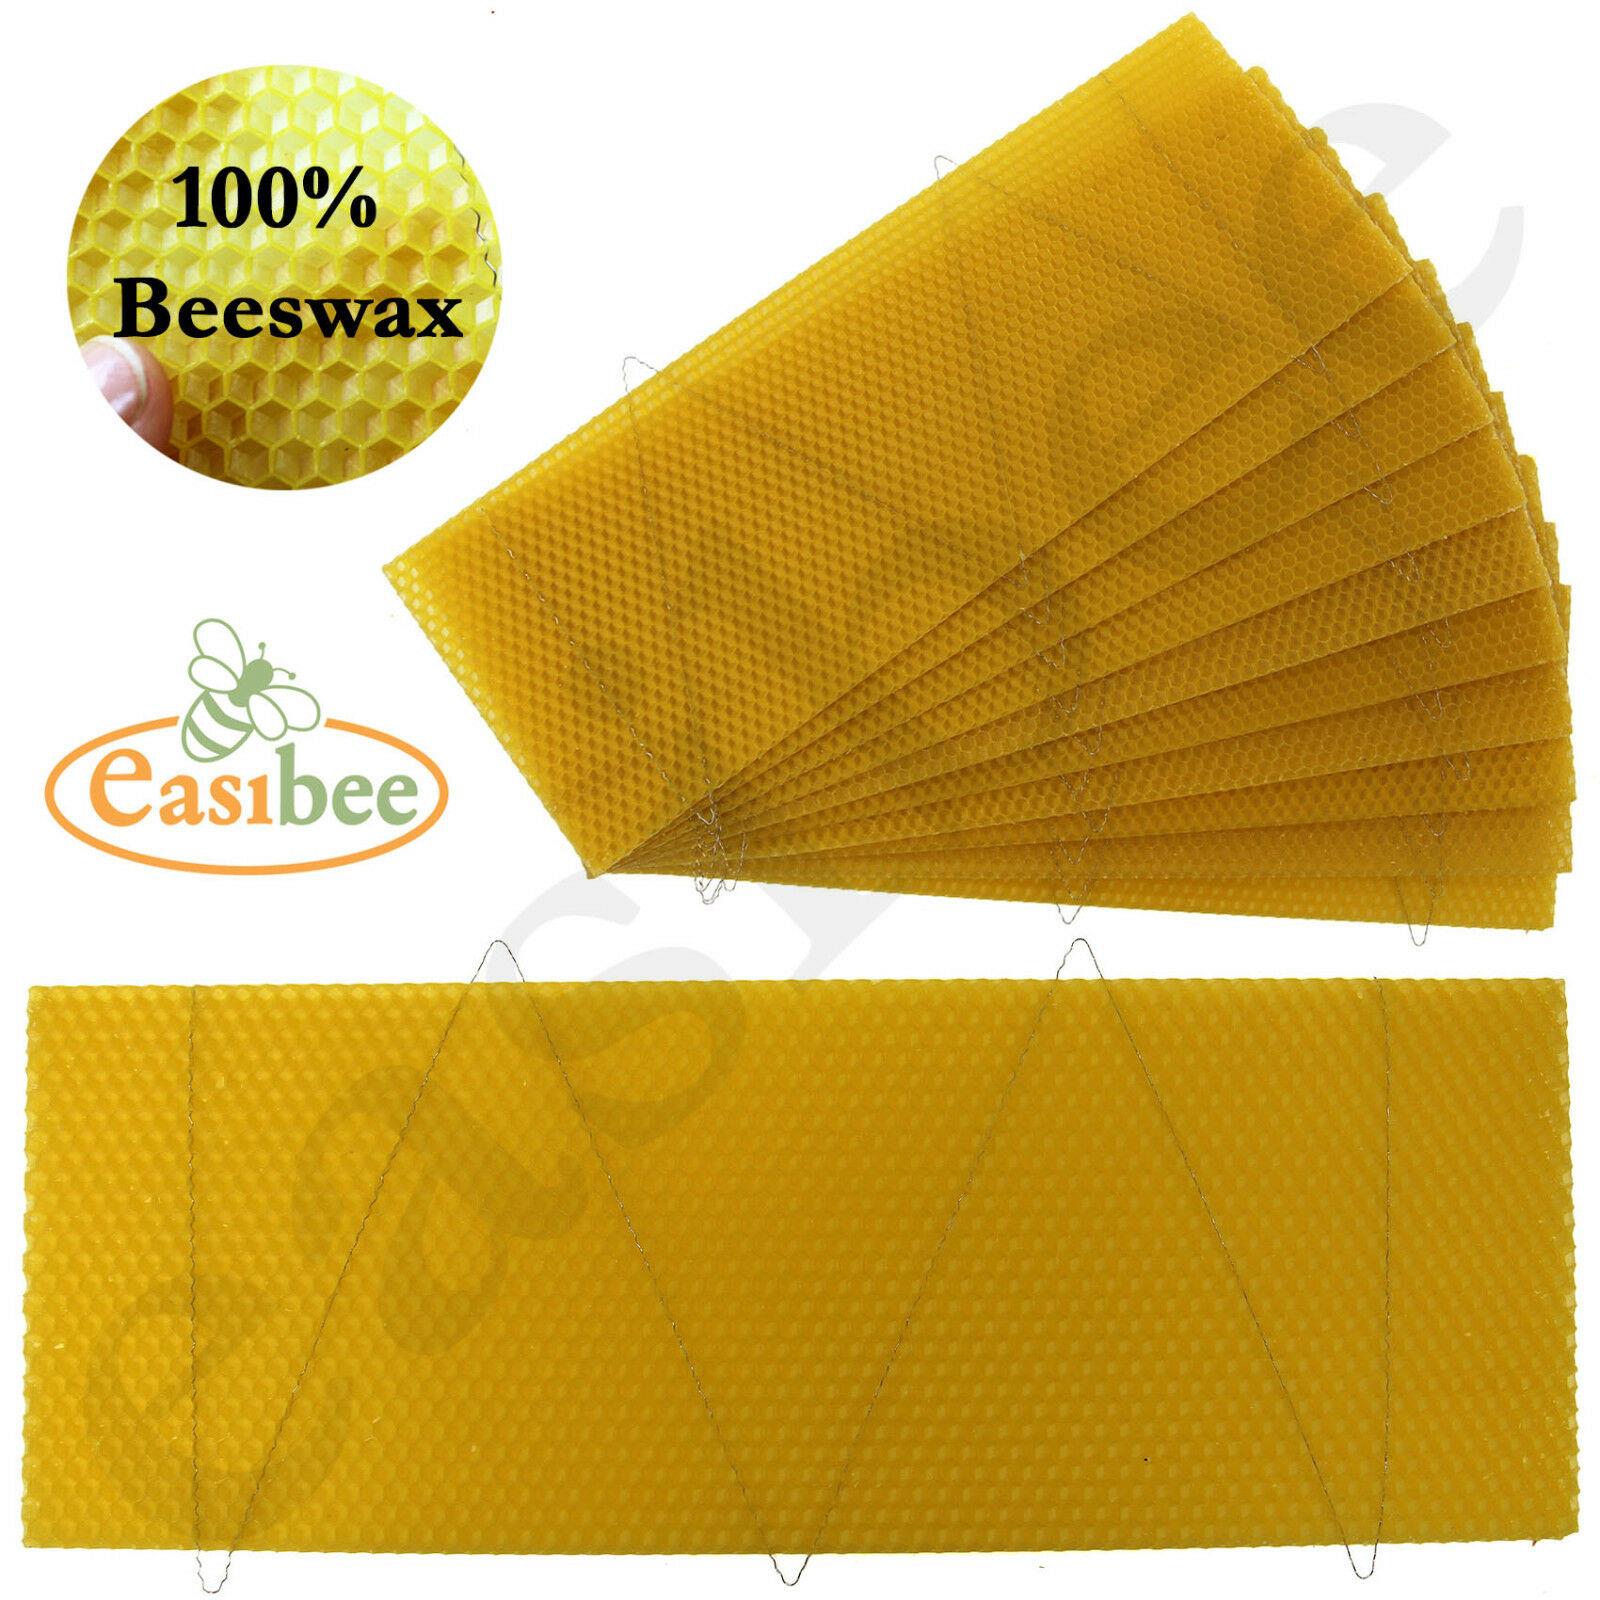 10 easibee National Bee Hive Super Wired 100/% Natural Beeswax Wax Foundation Sheets 10pcs